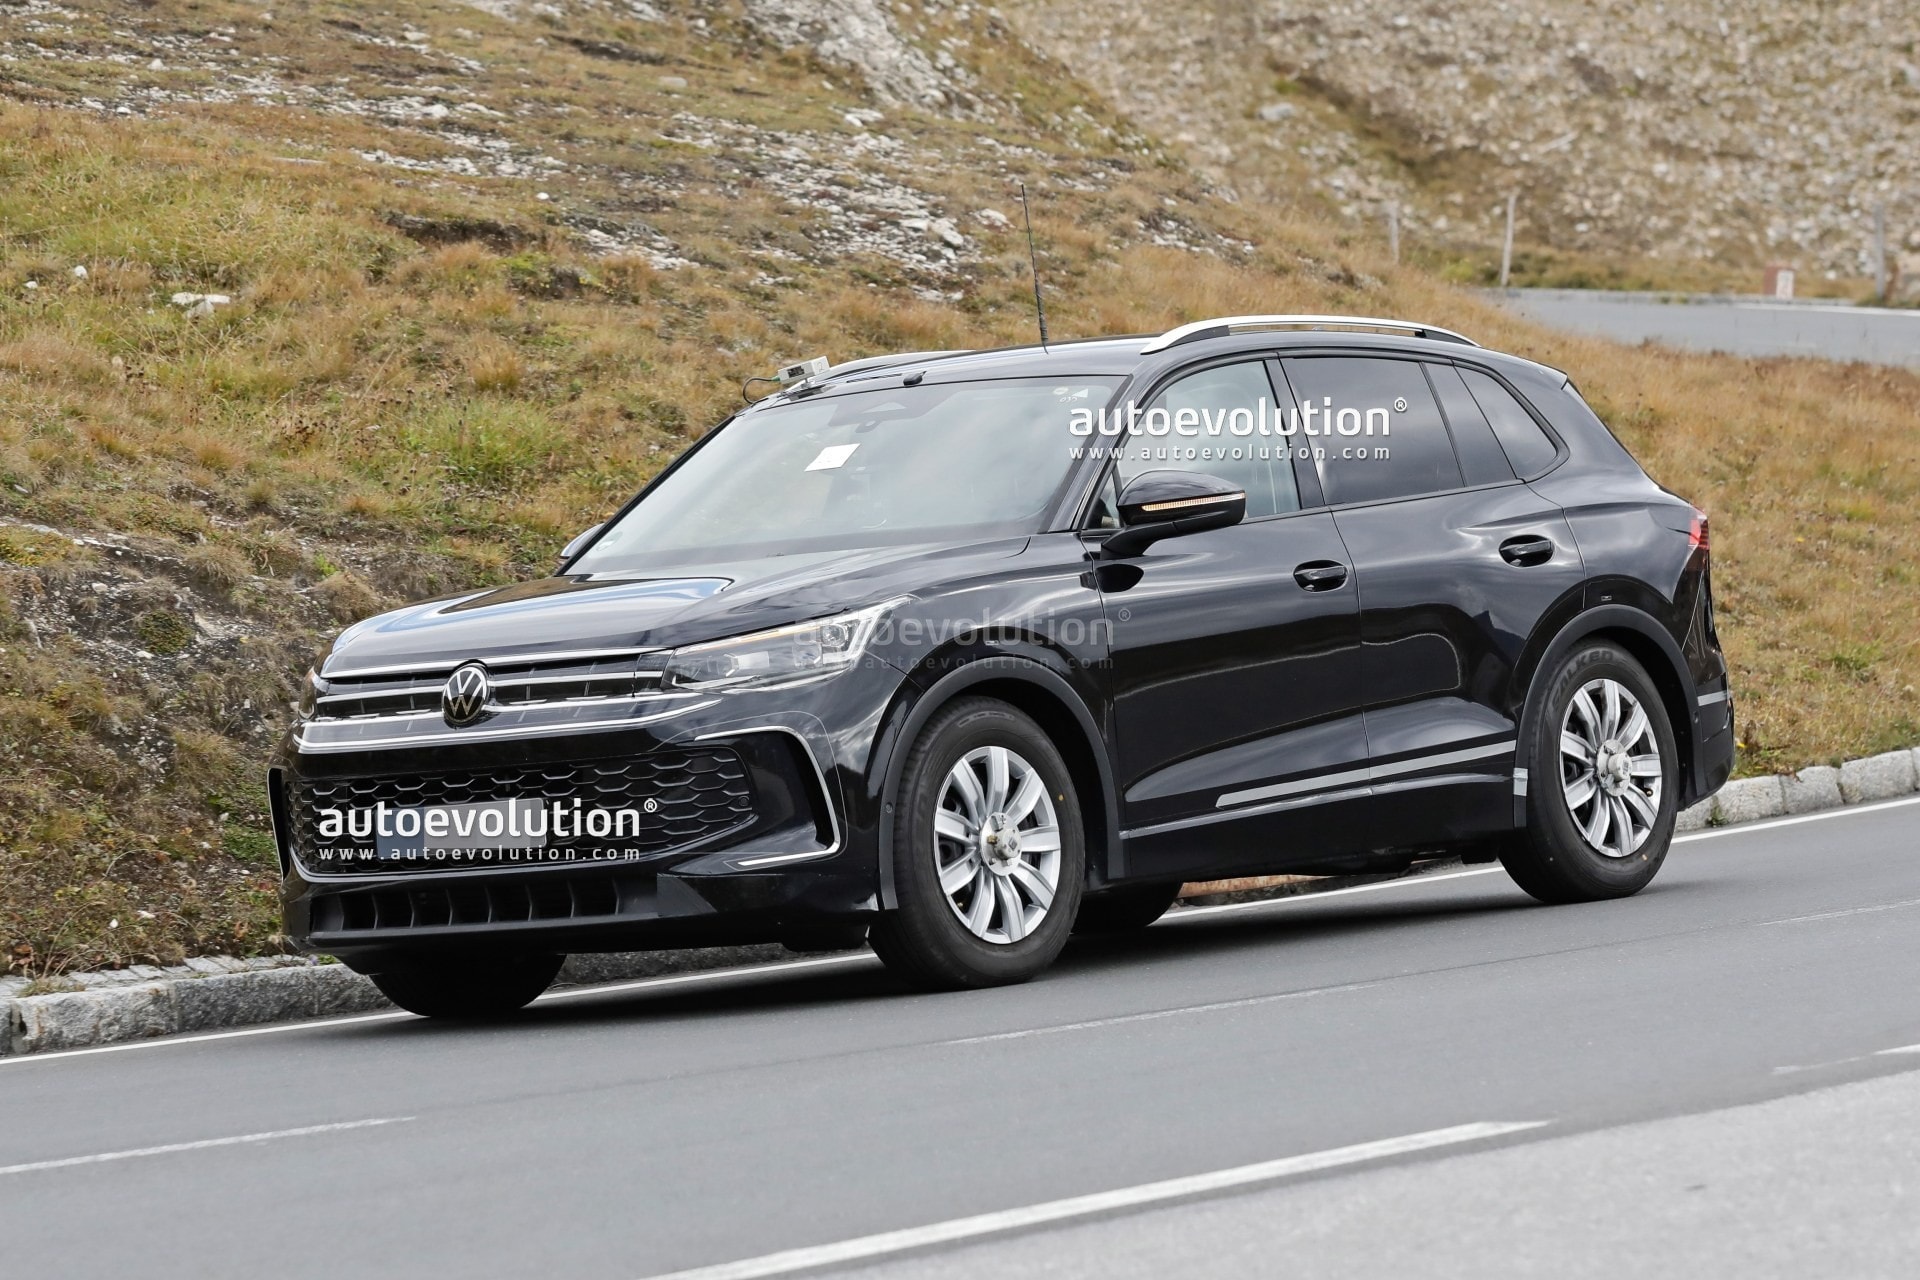 2023 Volkswagen Tiguan Spied For The First Time Has Deceiving